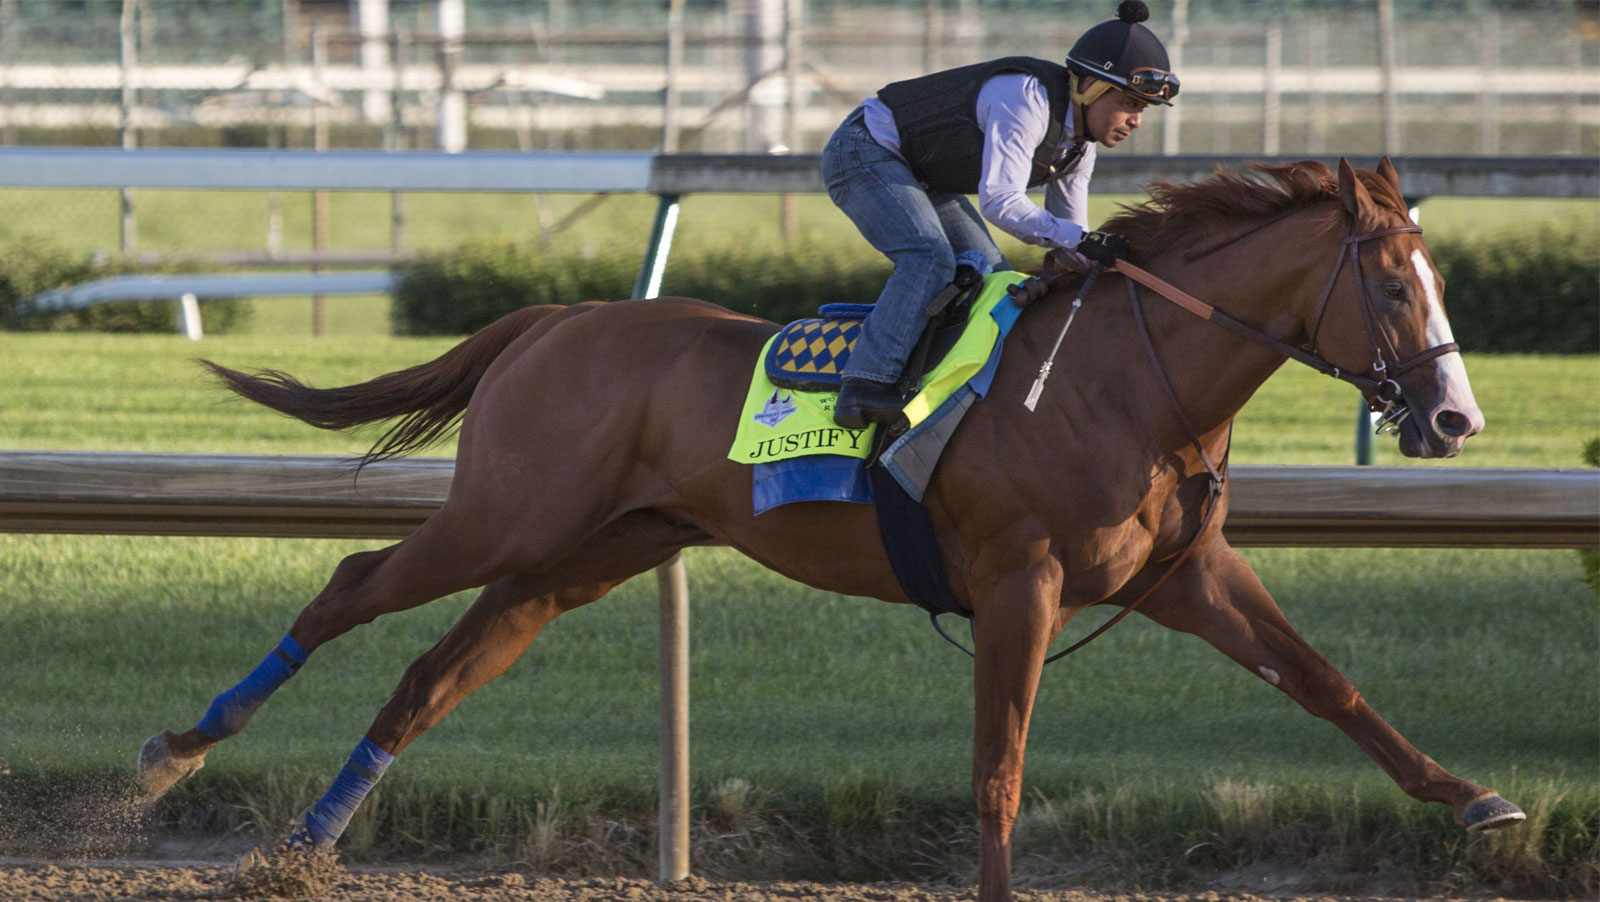 Belmont Stakes Betting Preview: Justify Leads the Pack